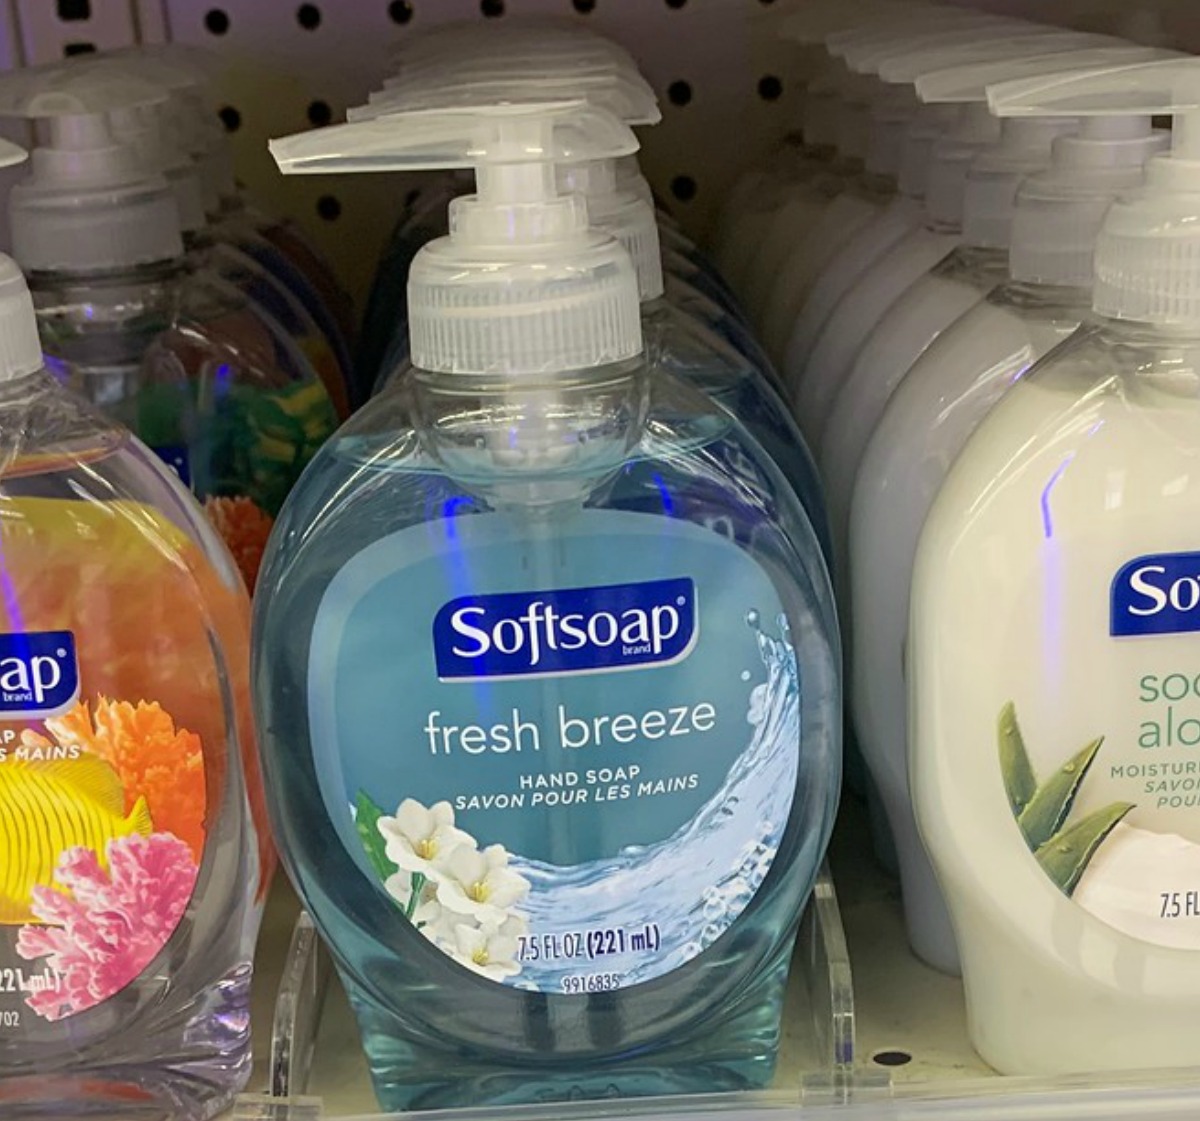 fresh breeze scented hand soap from soft soap in store on shelf